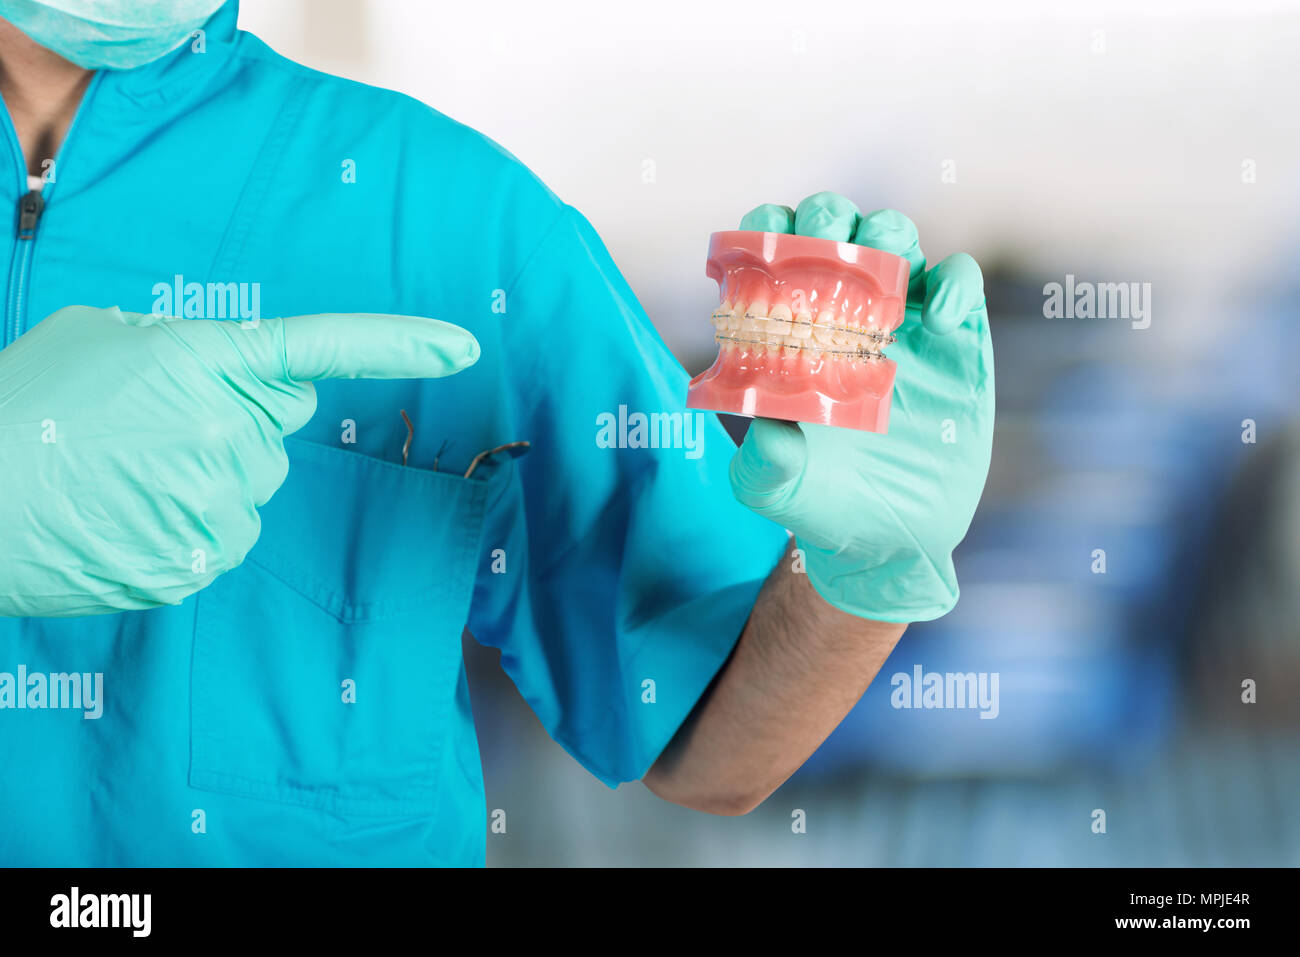 Dentist shows how to apply a brace Stock Photo